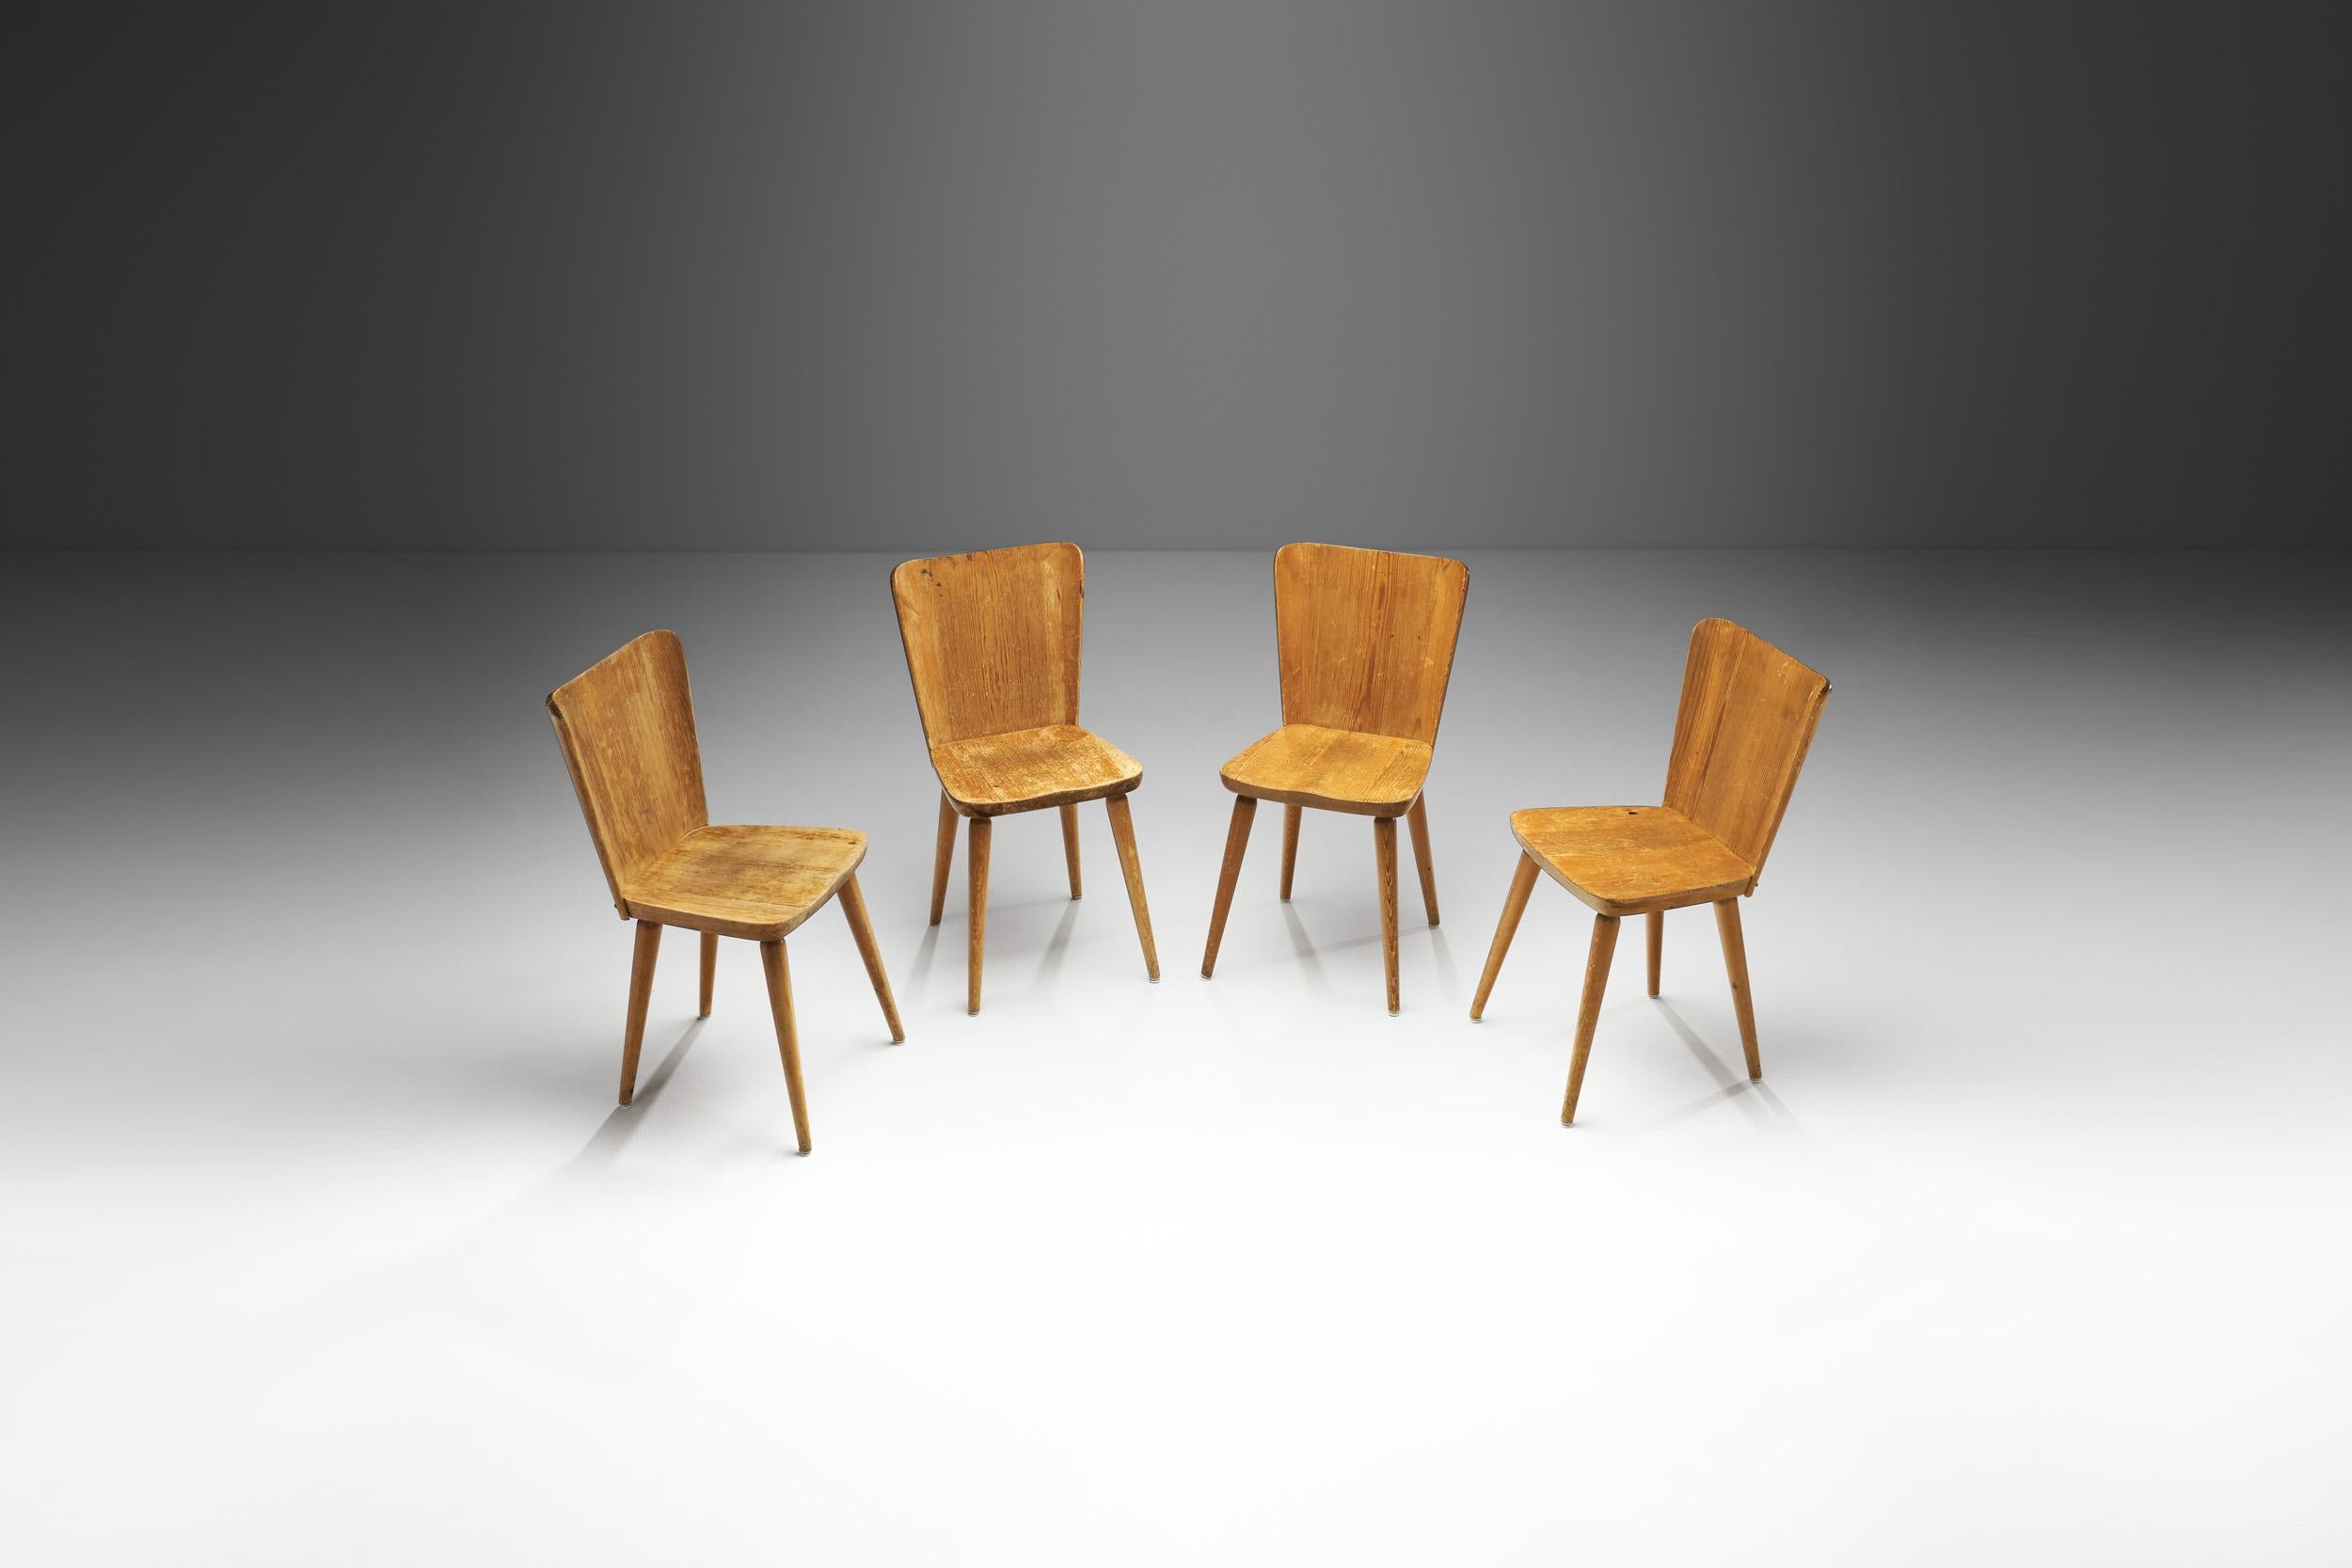 The Svensk Fur produced line of Göran Malmvall furniture is a nod to modernist design with traditional Swedish craftsmanship. The design of these chairs relays an insight about the society and culture in which it was produced: closeness to nature,